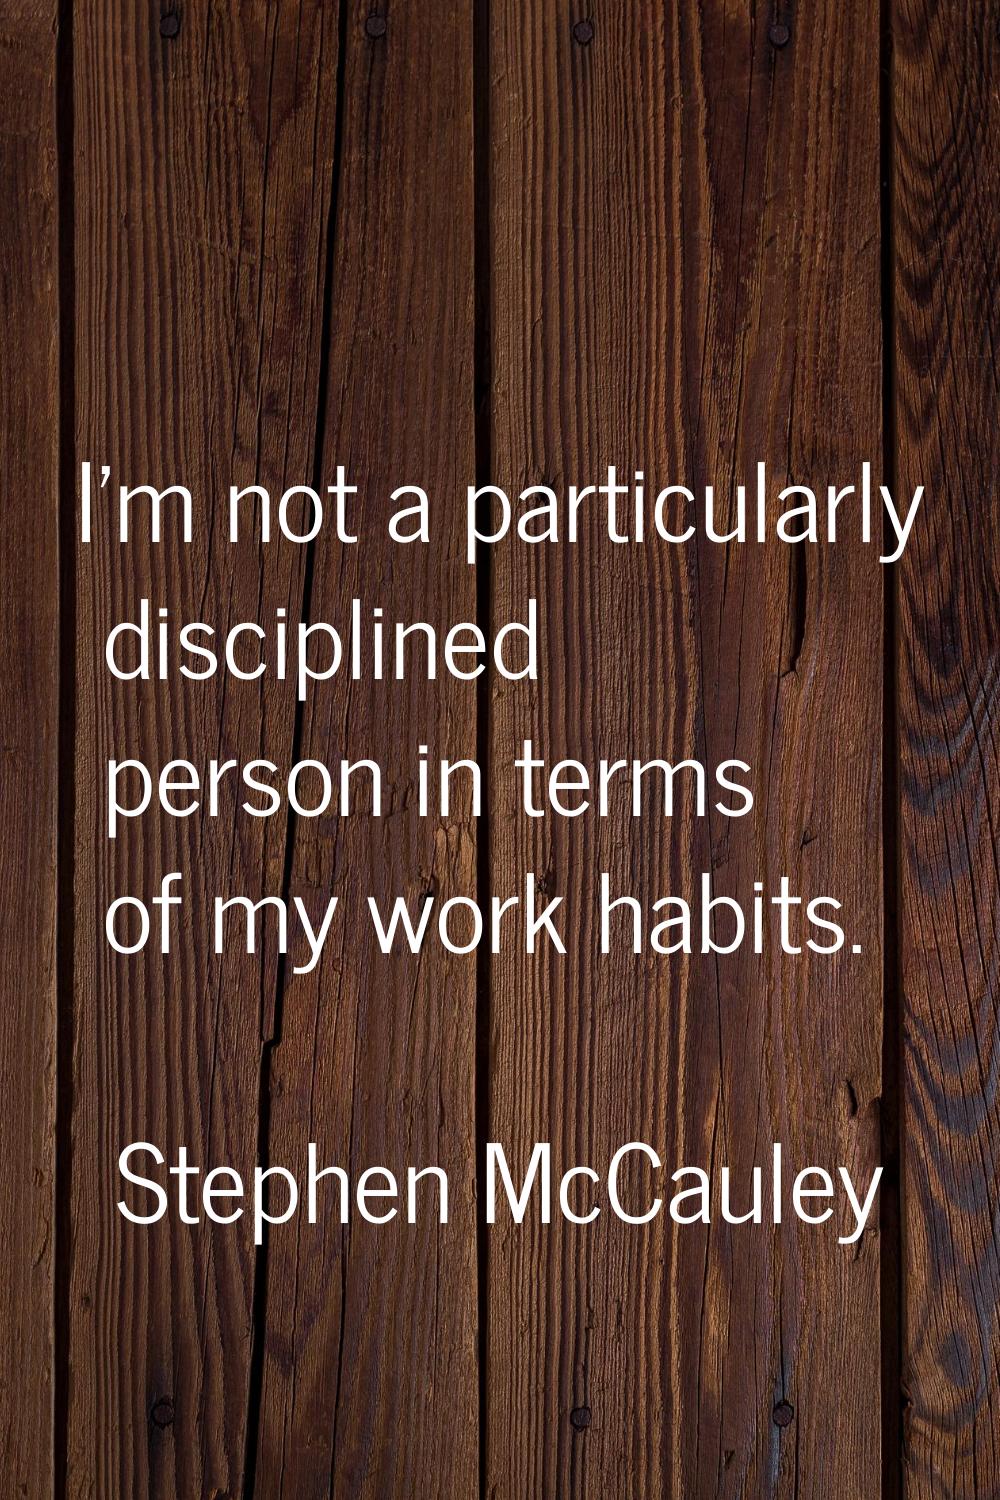 I'm not a particularly disciplined person in terms of my work habits.